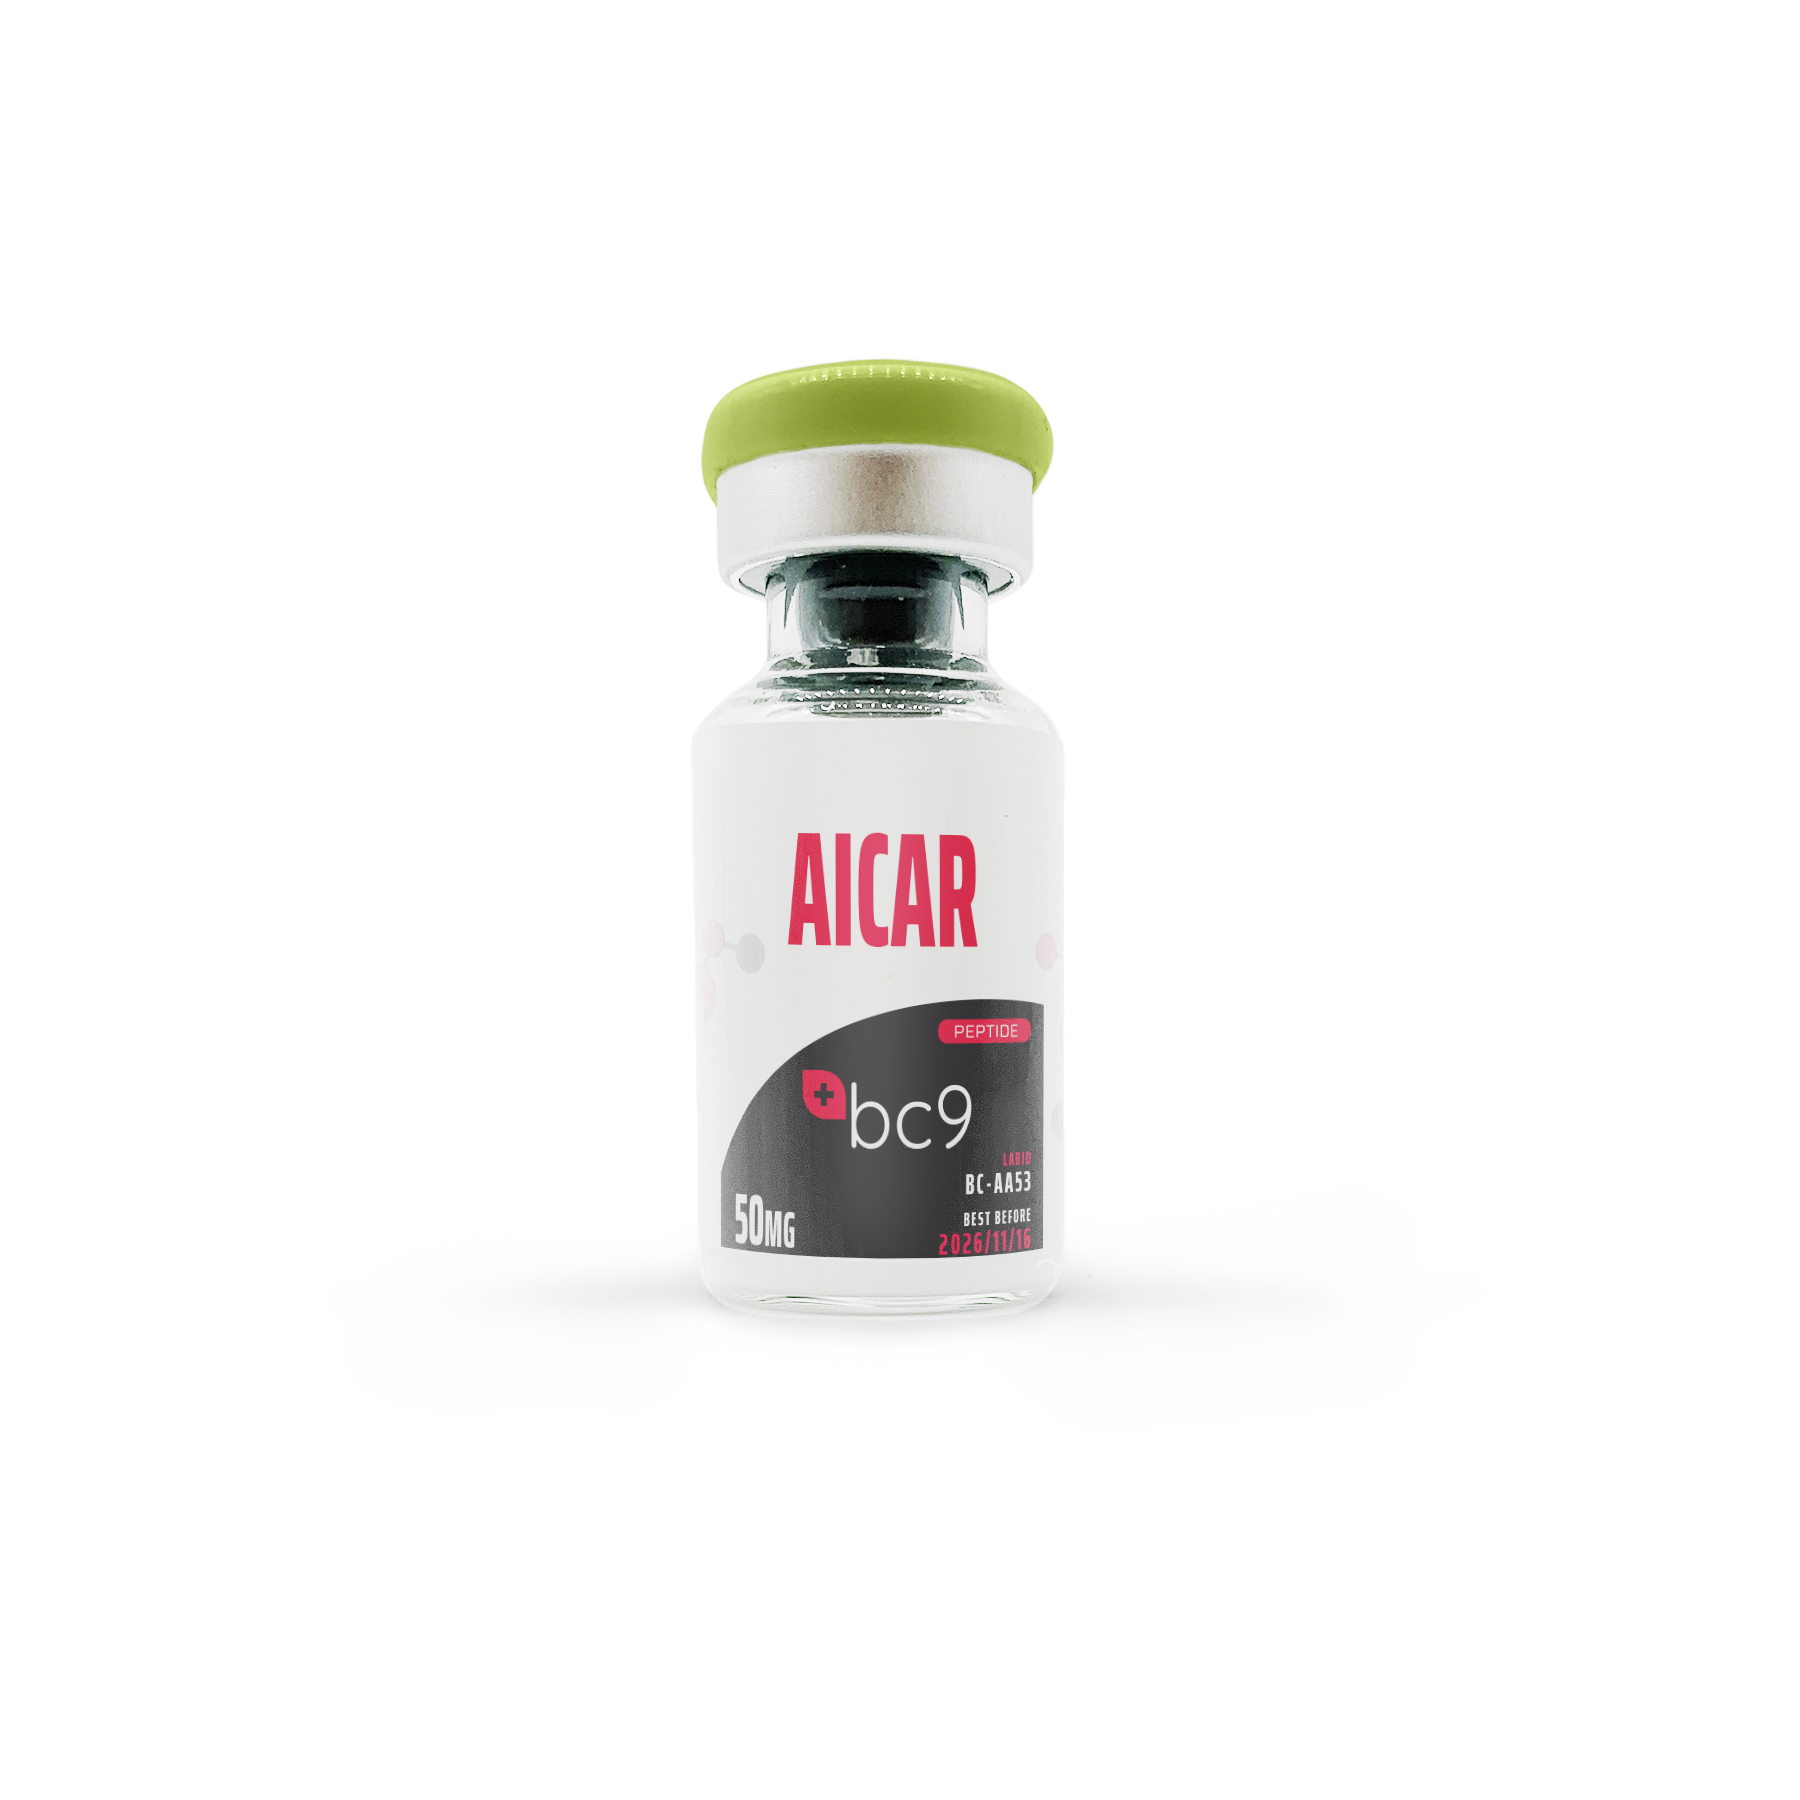 AICAR Peptide for SALE | Fast Shipping | BC9.org